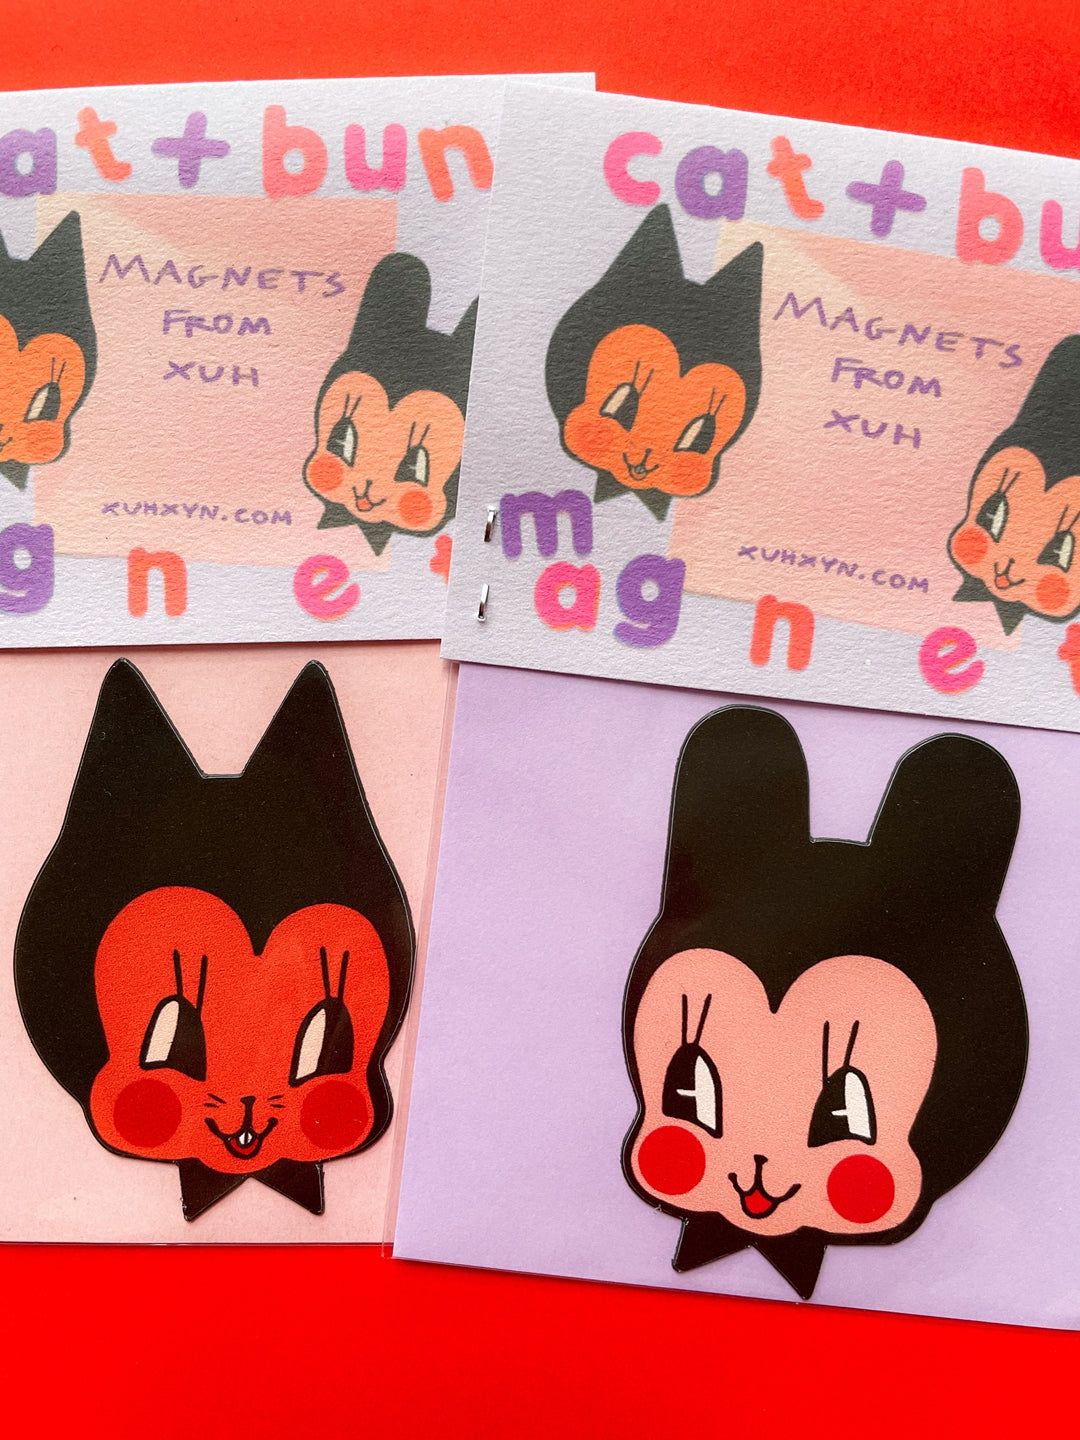 CAT & BUN - set of 2 magnets by XUH